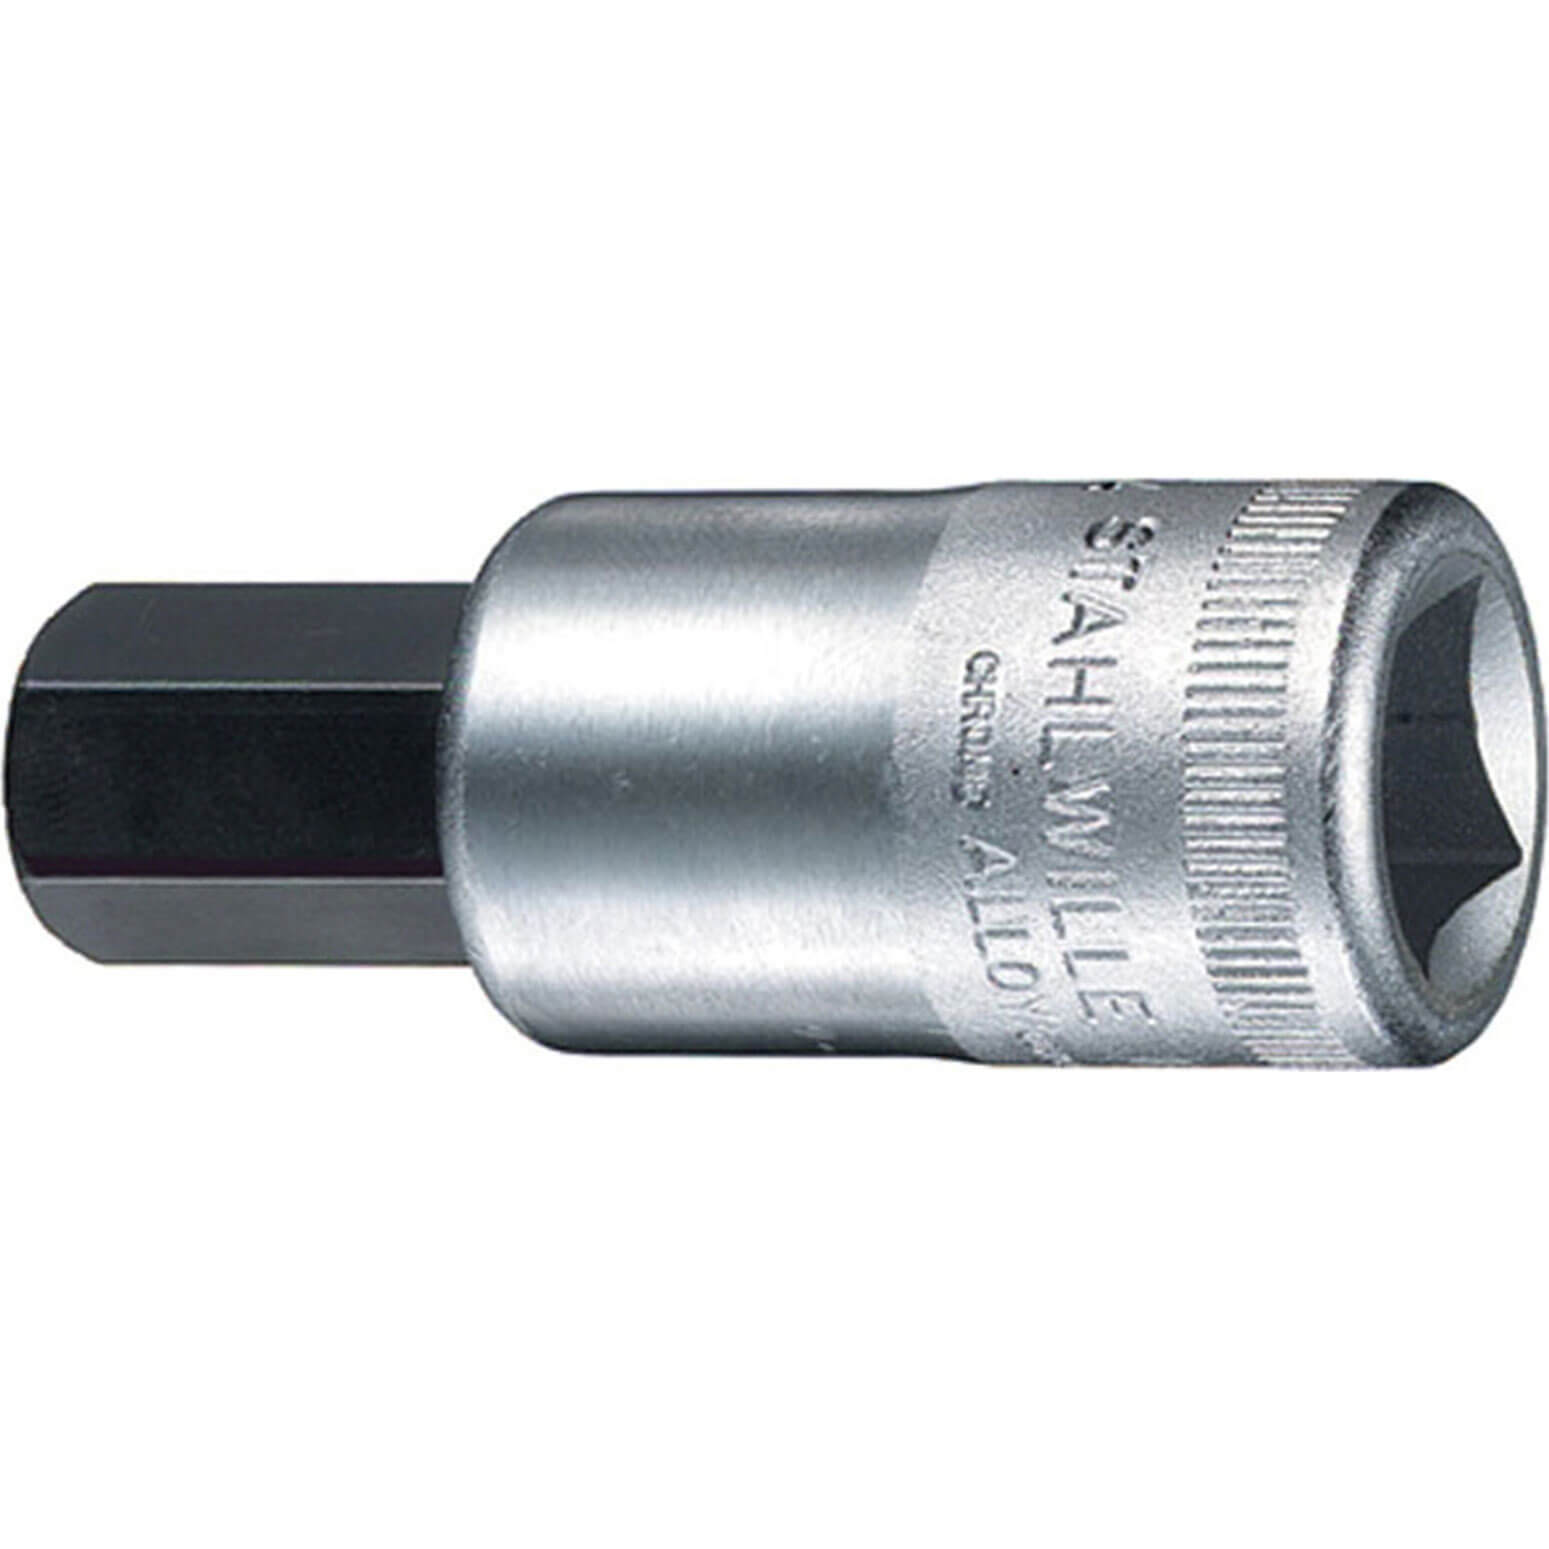 Image of Stahlwille 1/2" Drive INHEX Hexagon Socket Bit Imperial 1/2" 1/2"